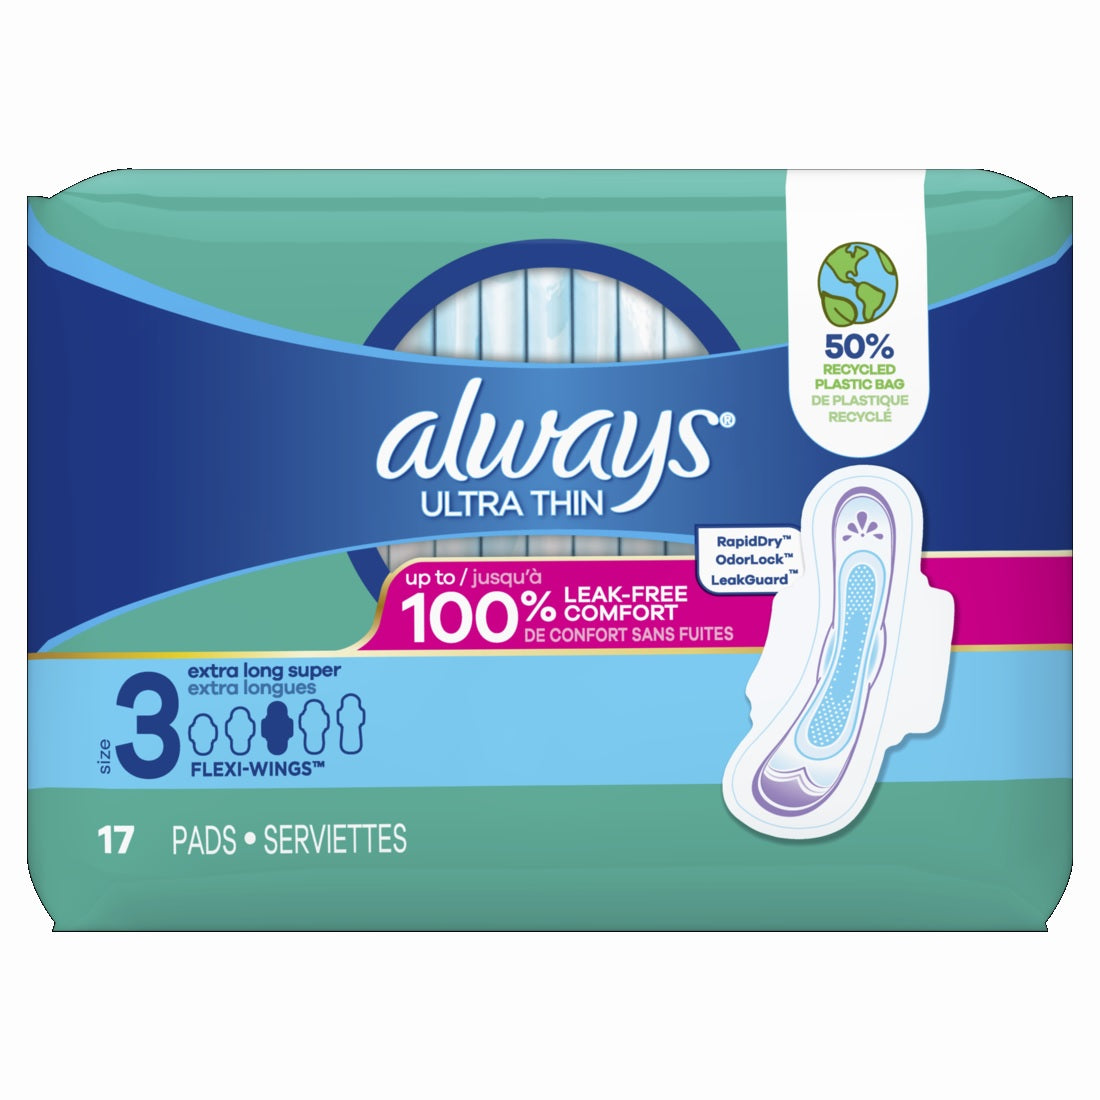 Always Ultra Thin Pads with Flexi-Wings Size 3 Extra Long Super Unscented - 17ct/6pk